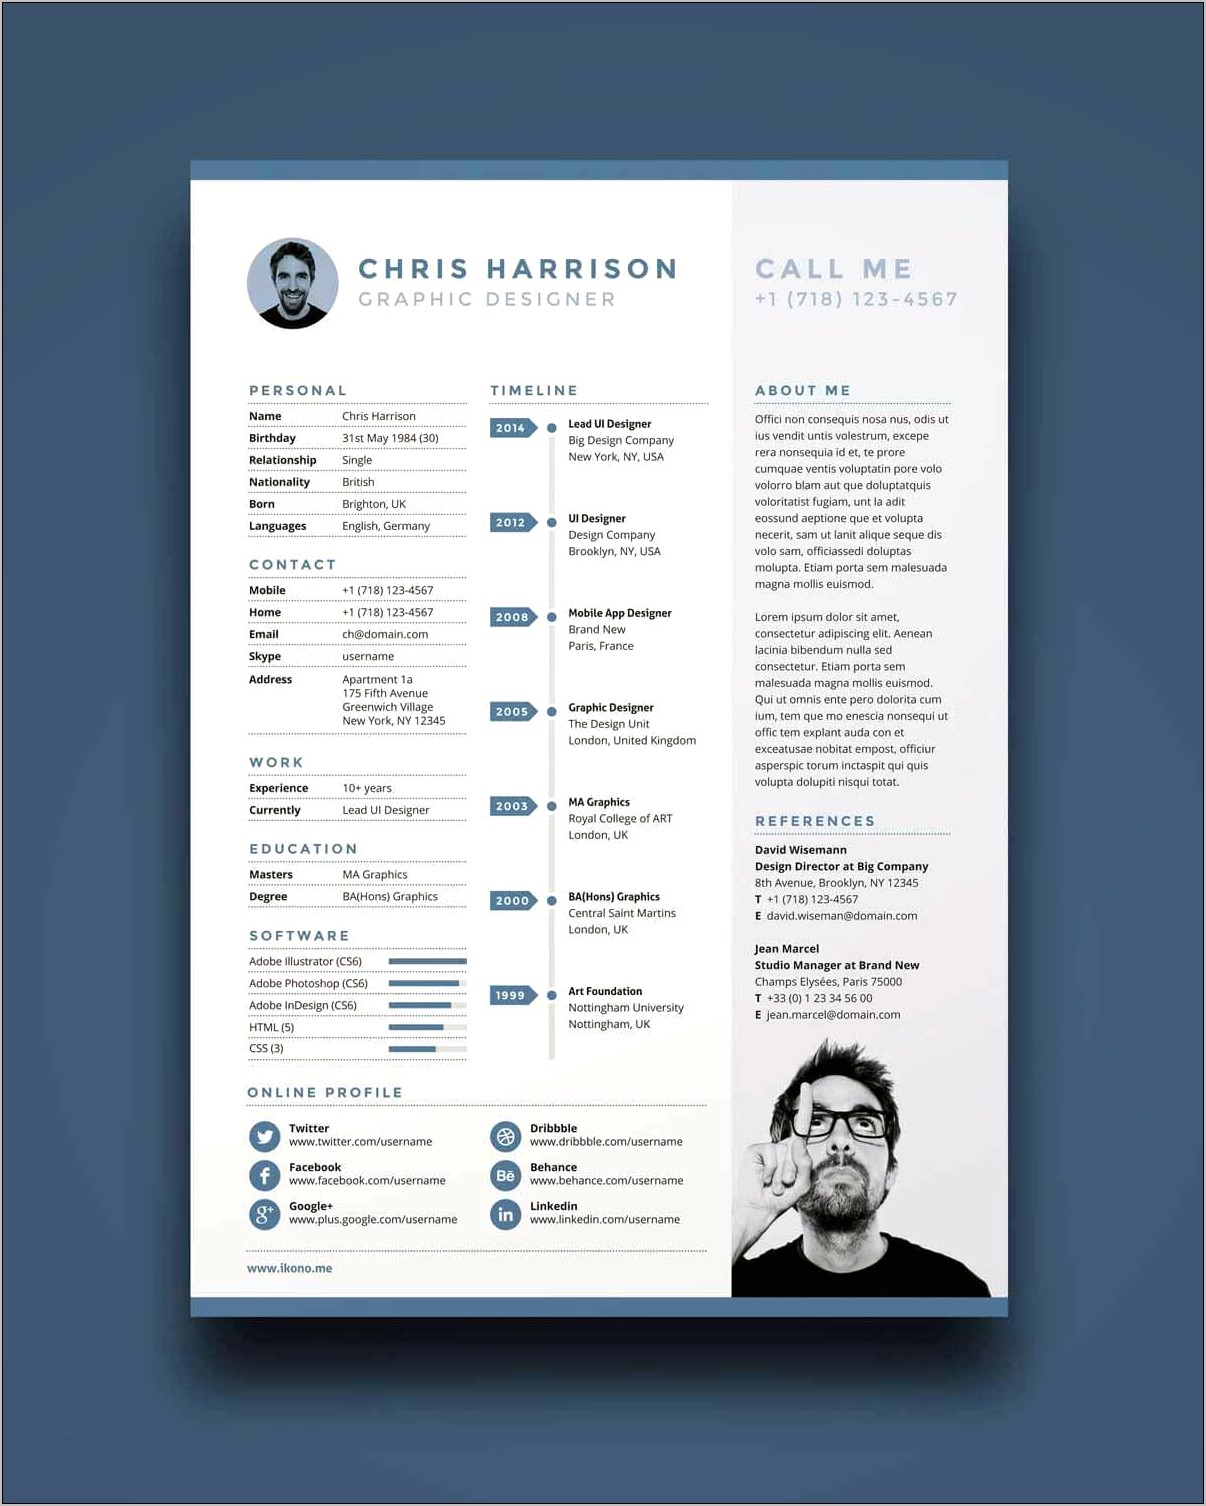 Single Page Resume Format In Word